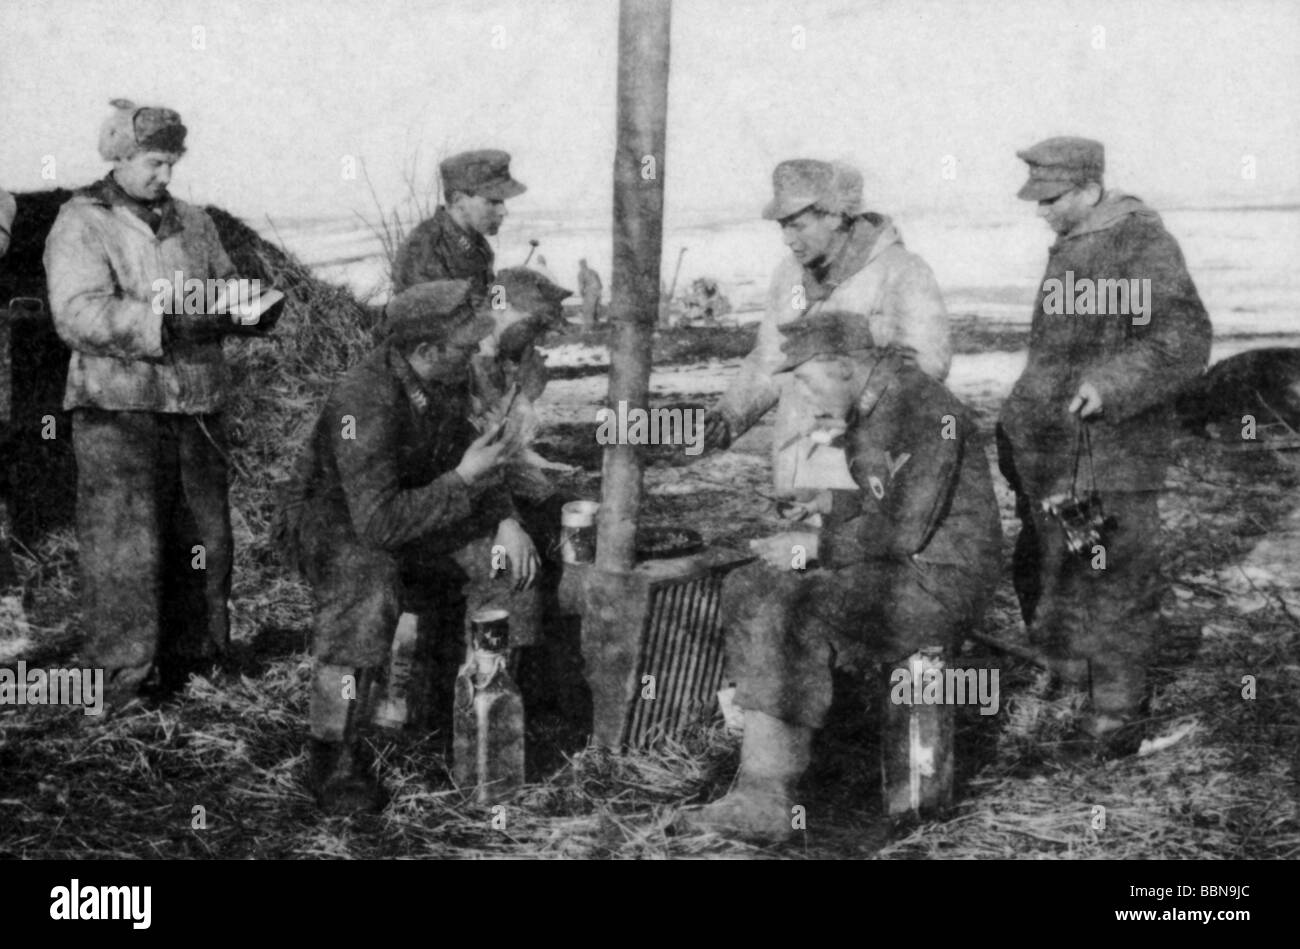 events, Second World War / WWII, Russia 1944 / 1945, German soldiers with a self-made stove, near Britskoye, Ukraine, late January 1944, Eastern Front, historic, historical, winter, snow, USSR, Soviet Union, 20th century, historic, historical, winter clothes, Wehrmacht, Luftwaffe, warming up, 1940s, people, Stock Photo